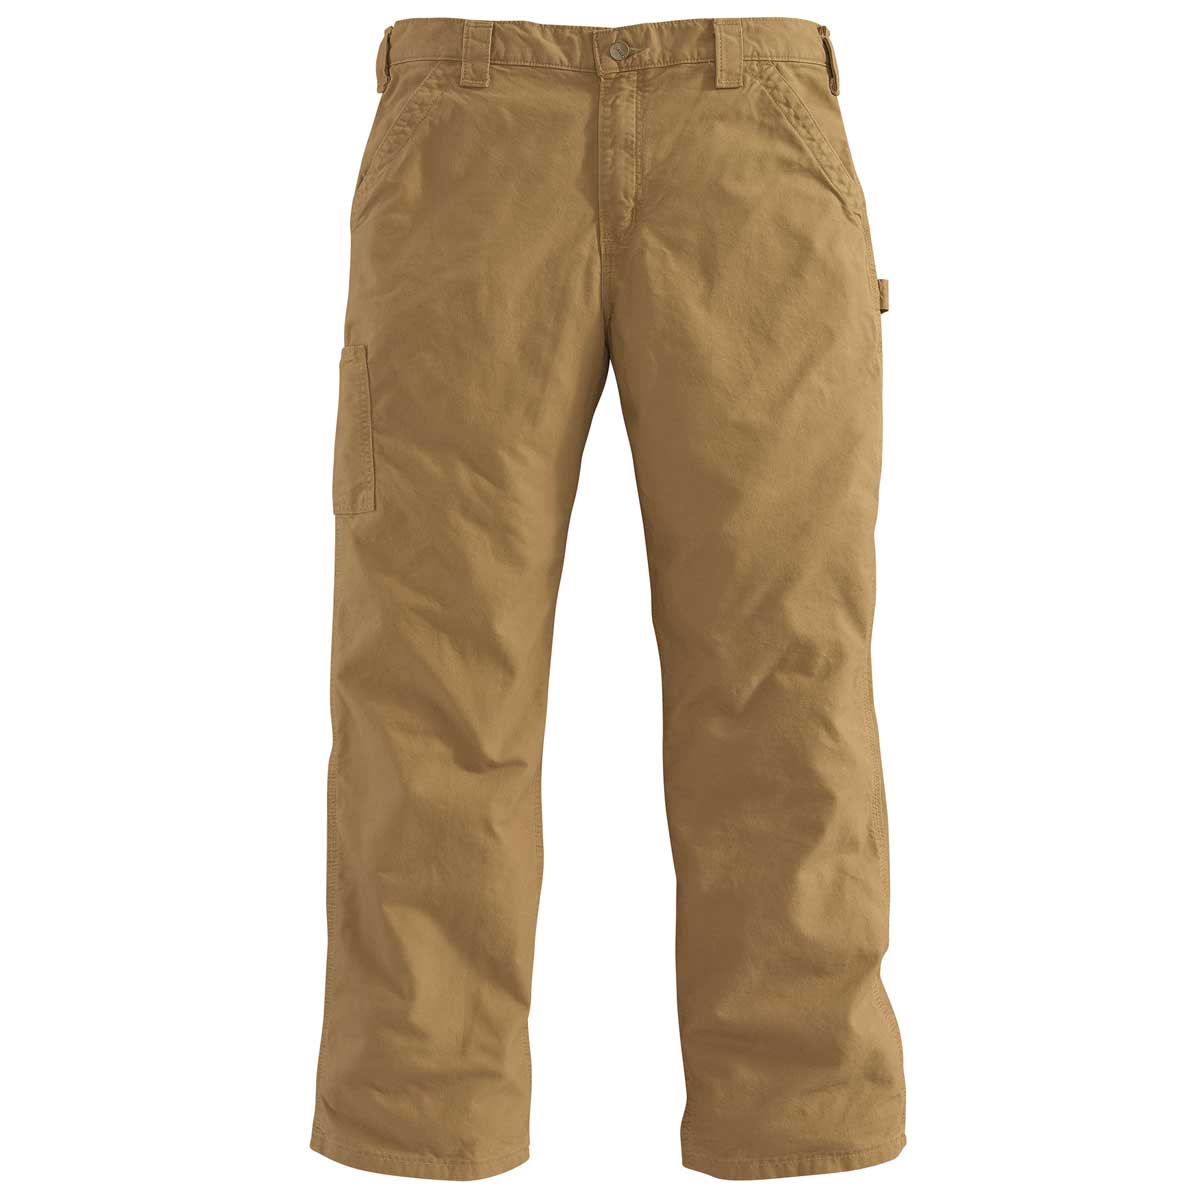 Carhartt Loose Fit Canvas Utility Work Pant, Waist Sizes 40"-50"